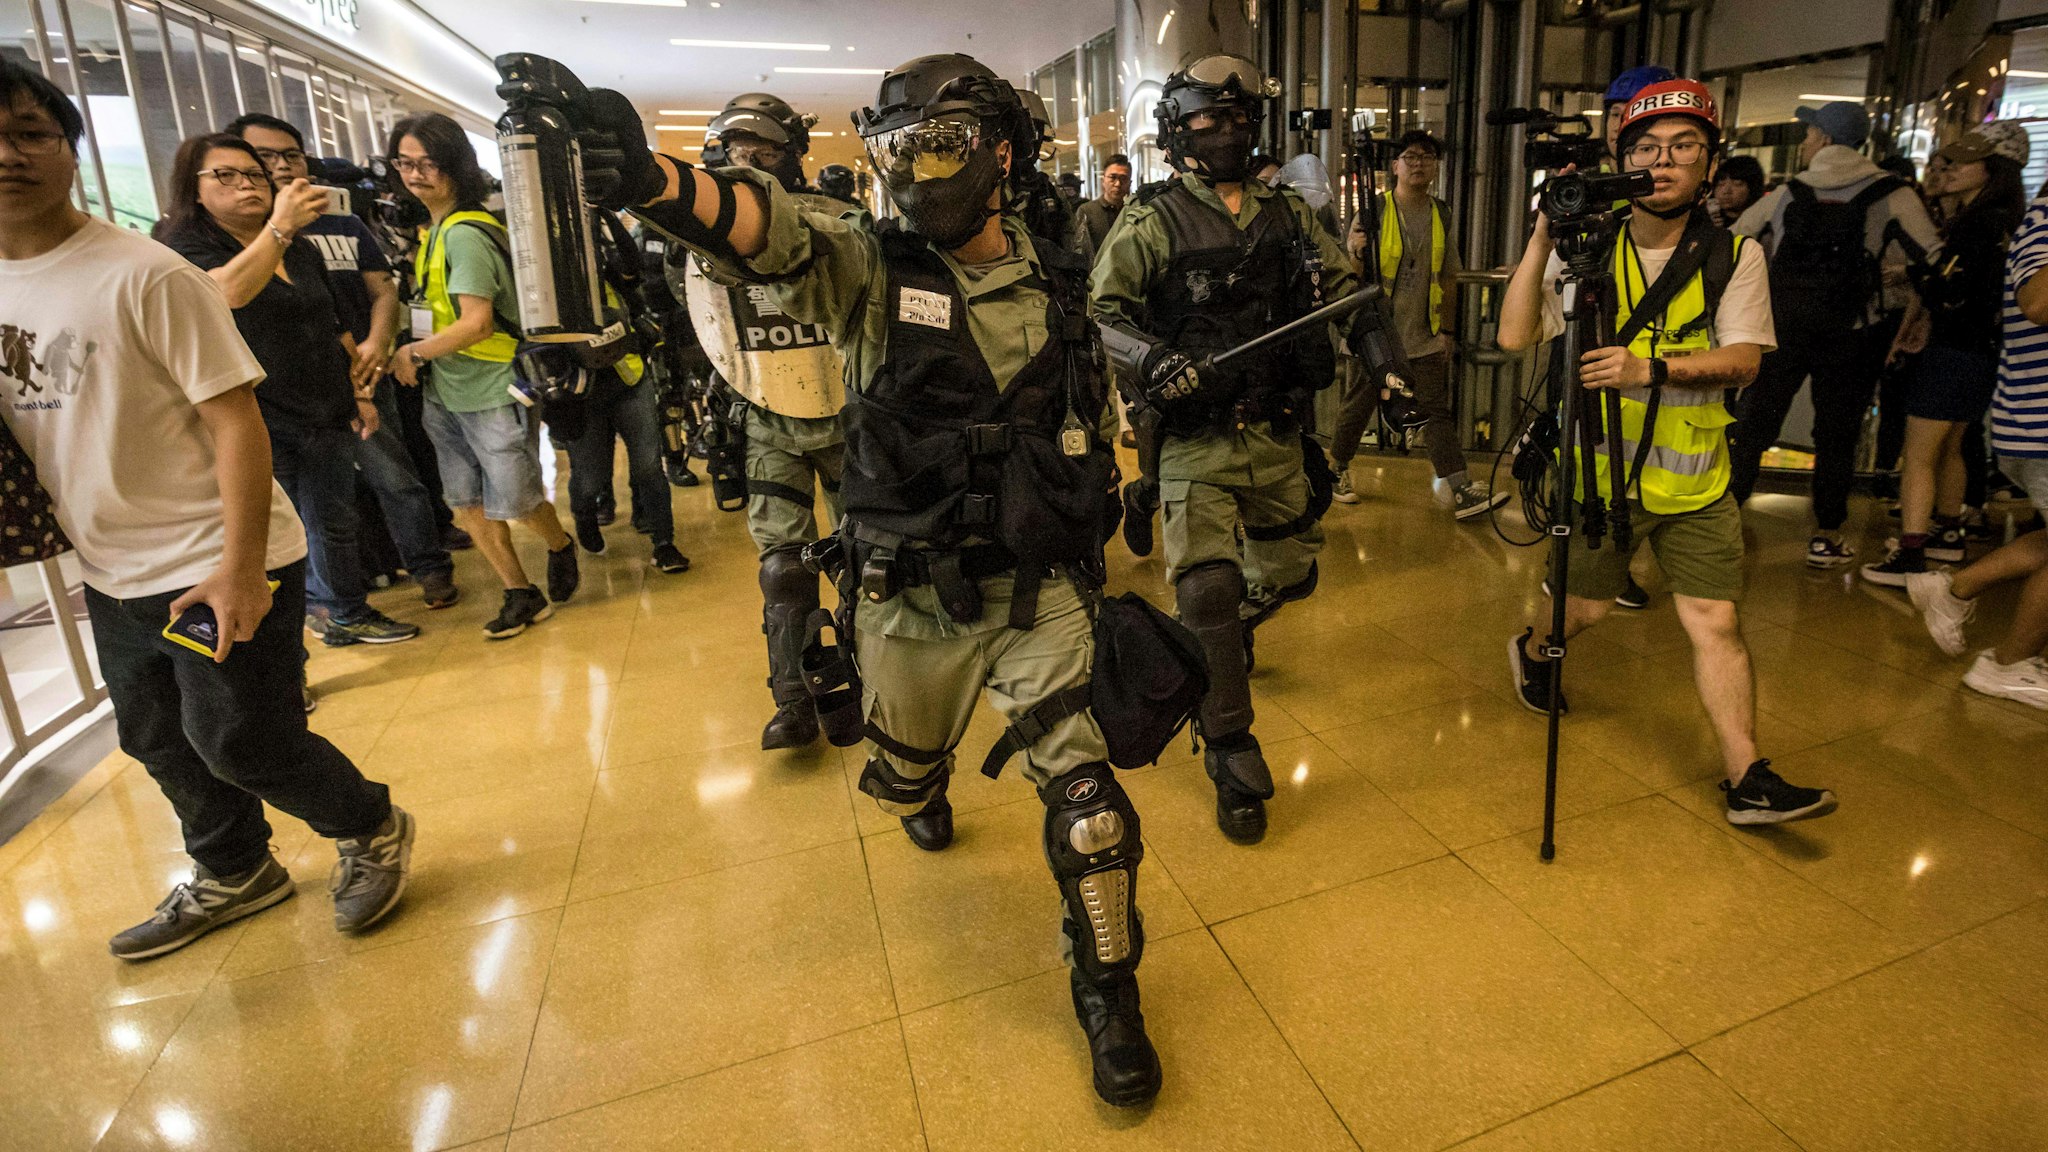 A riot police officer chases a protester while wielding a can of pepper spray inside the City Plaza mall in the Tai Koo Shing area in Hong Kong on November 3, 2019, after a bloody knife fight wounding six people triggered there. - A bloody knife fight in Hong Kong left six people wounded on November 3 evening, including a local pro-democracy politician who had his ear bitten off, capping another chaotic day of political unrest in the city. (Photo by VIVEK PRAKASH / AFP) (Photo by VIVEK PRAKASH/AFP via Getty Images)